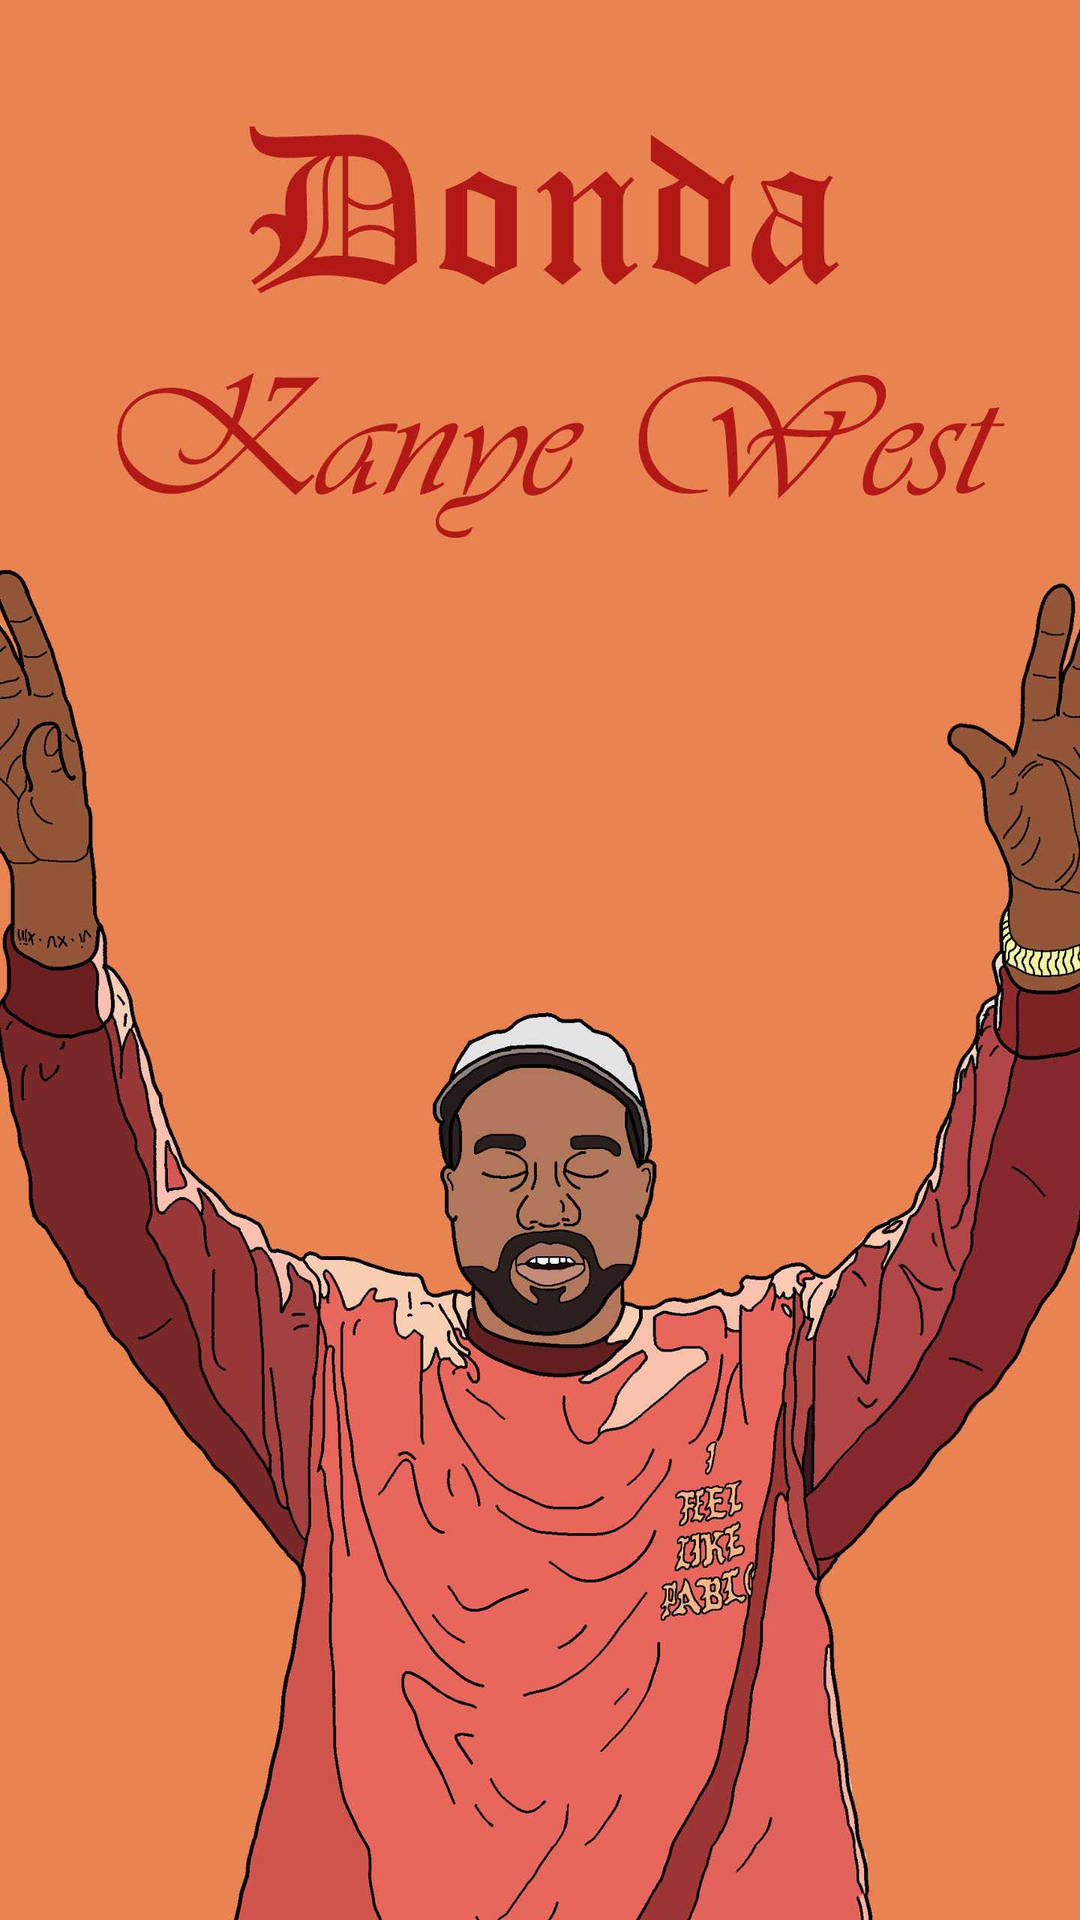 Kanye west wallpaper by Younglaflamee  Download on ZEDGE  8c6d